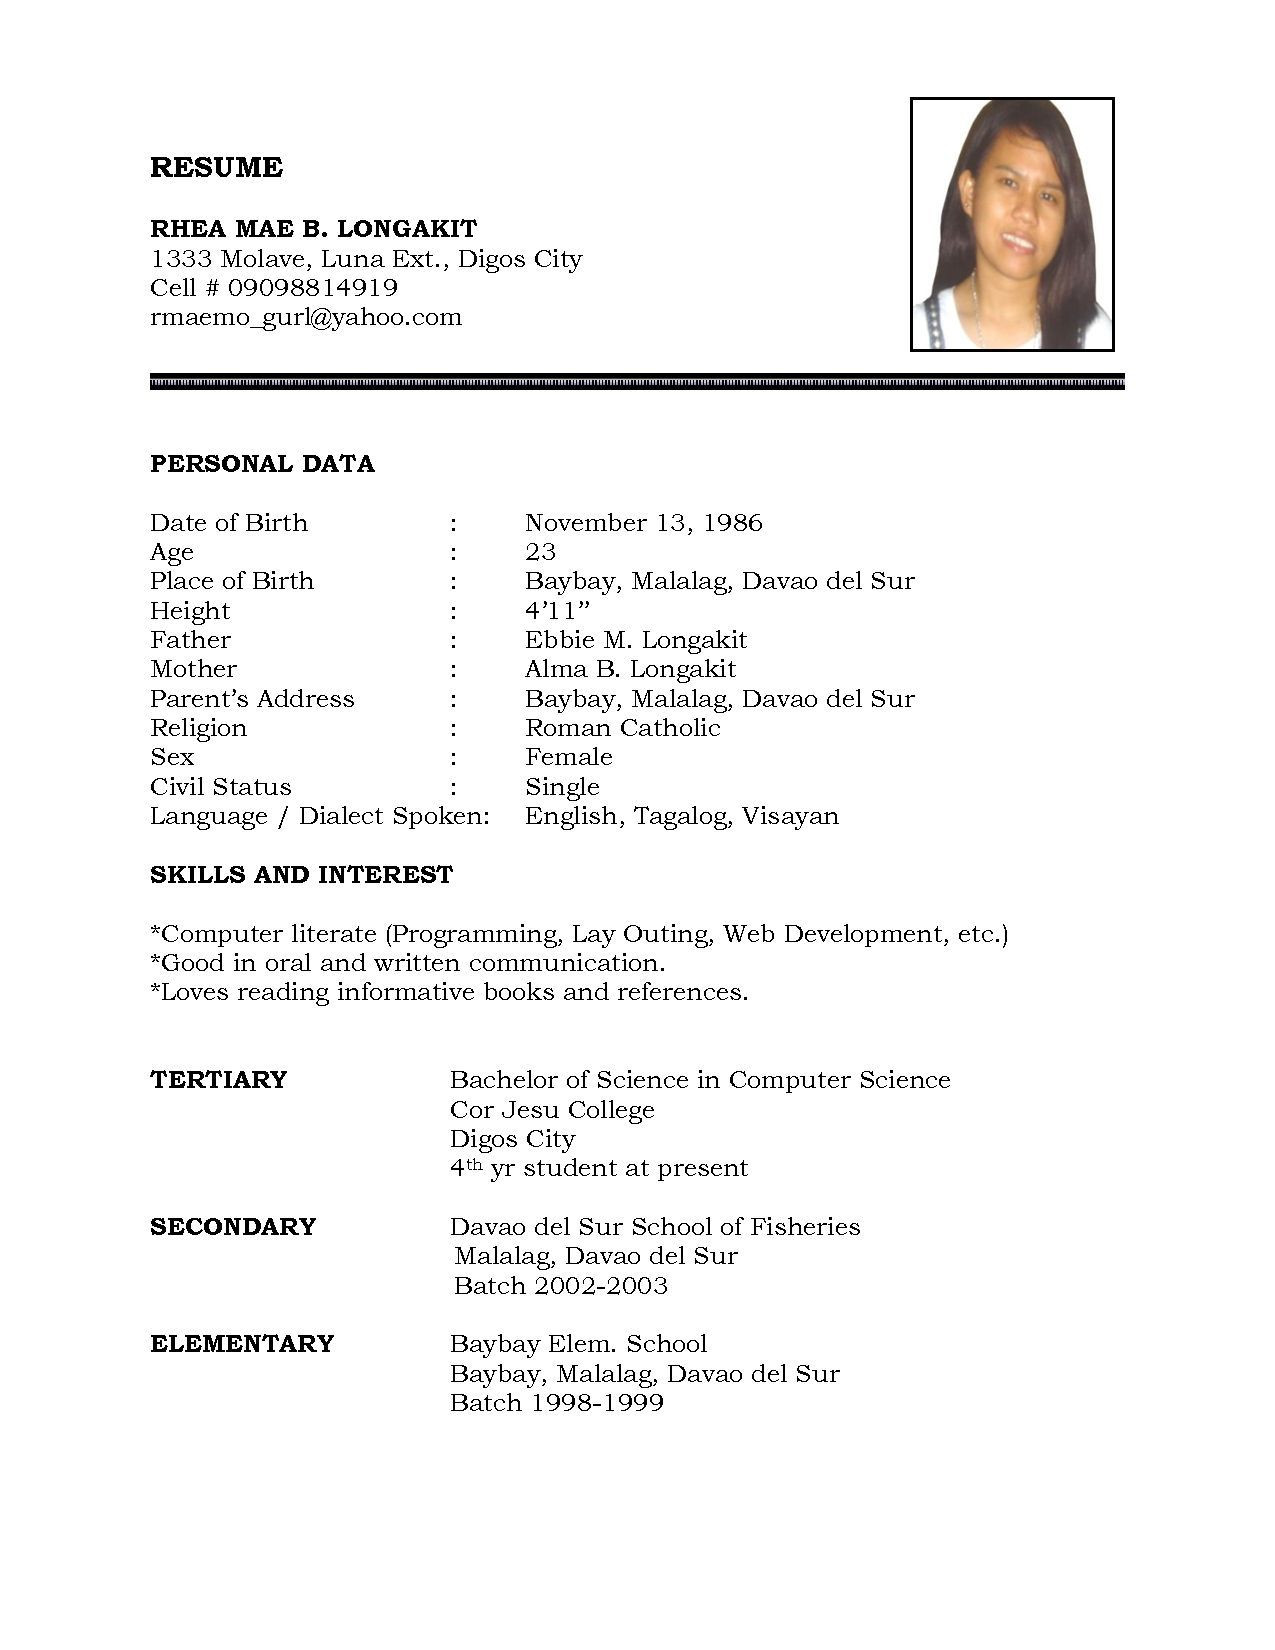 Resume Samples for College Students Pdf Pin by Laurie Koitzsch Quick On Carissa B. Hernandez Job Resume …